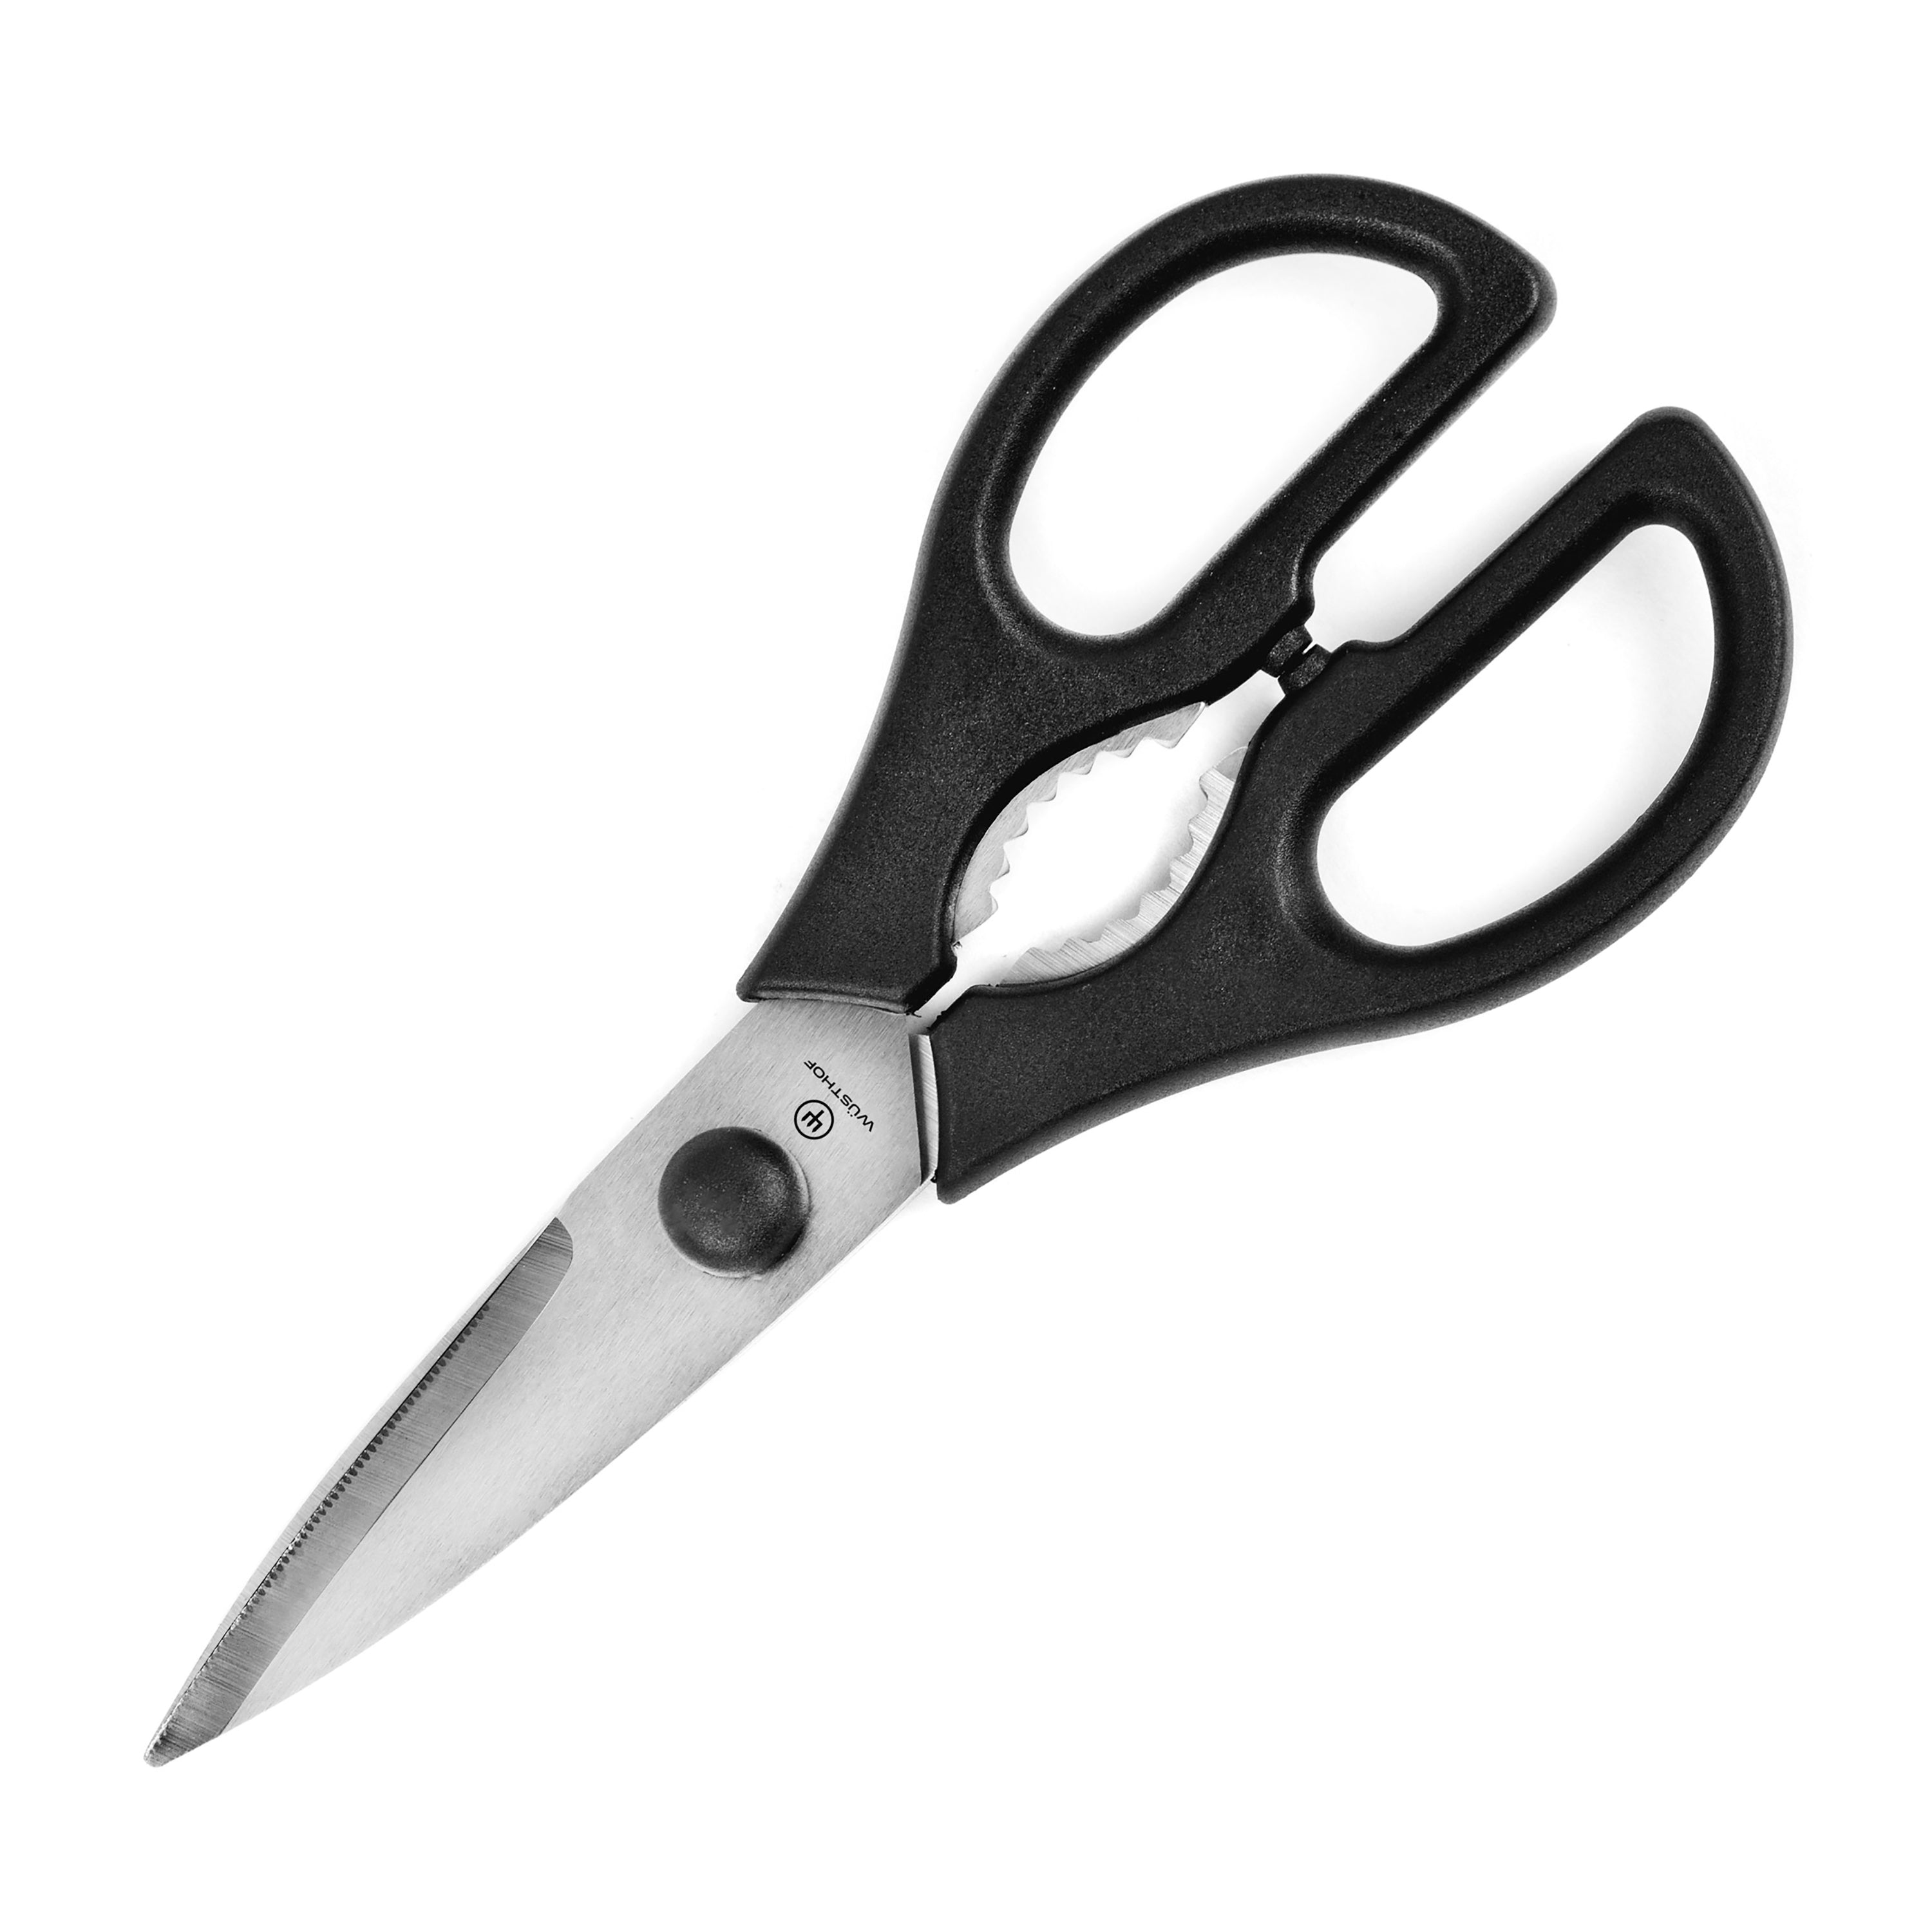 Wusthof Come Apart Kitchen Shears Scissor Unboxing & Review 